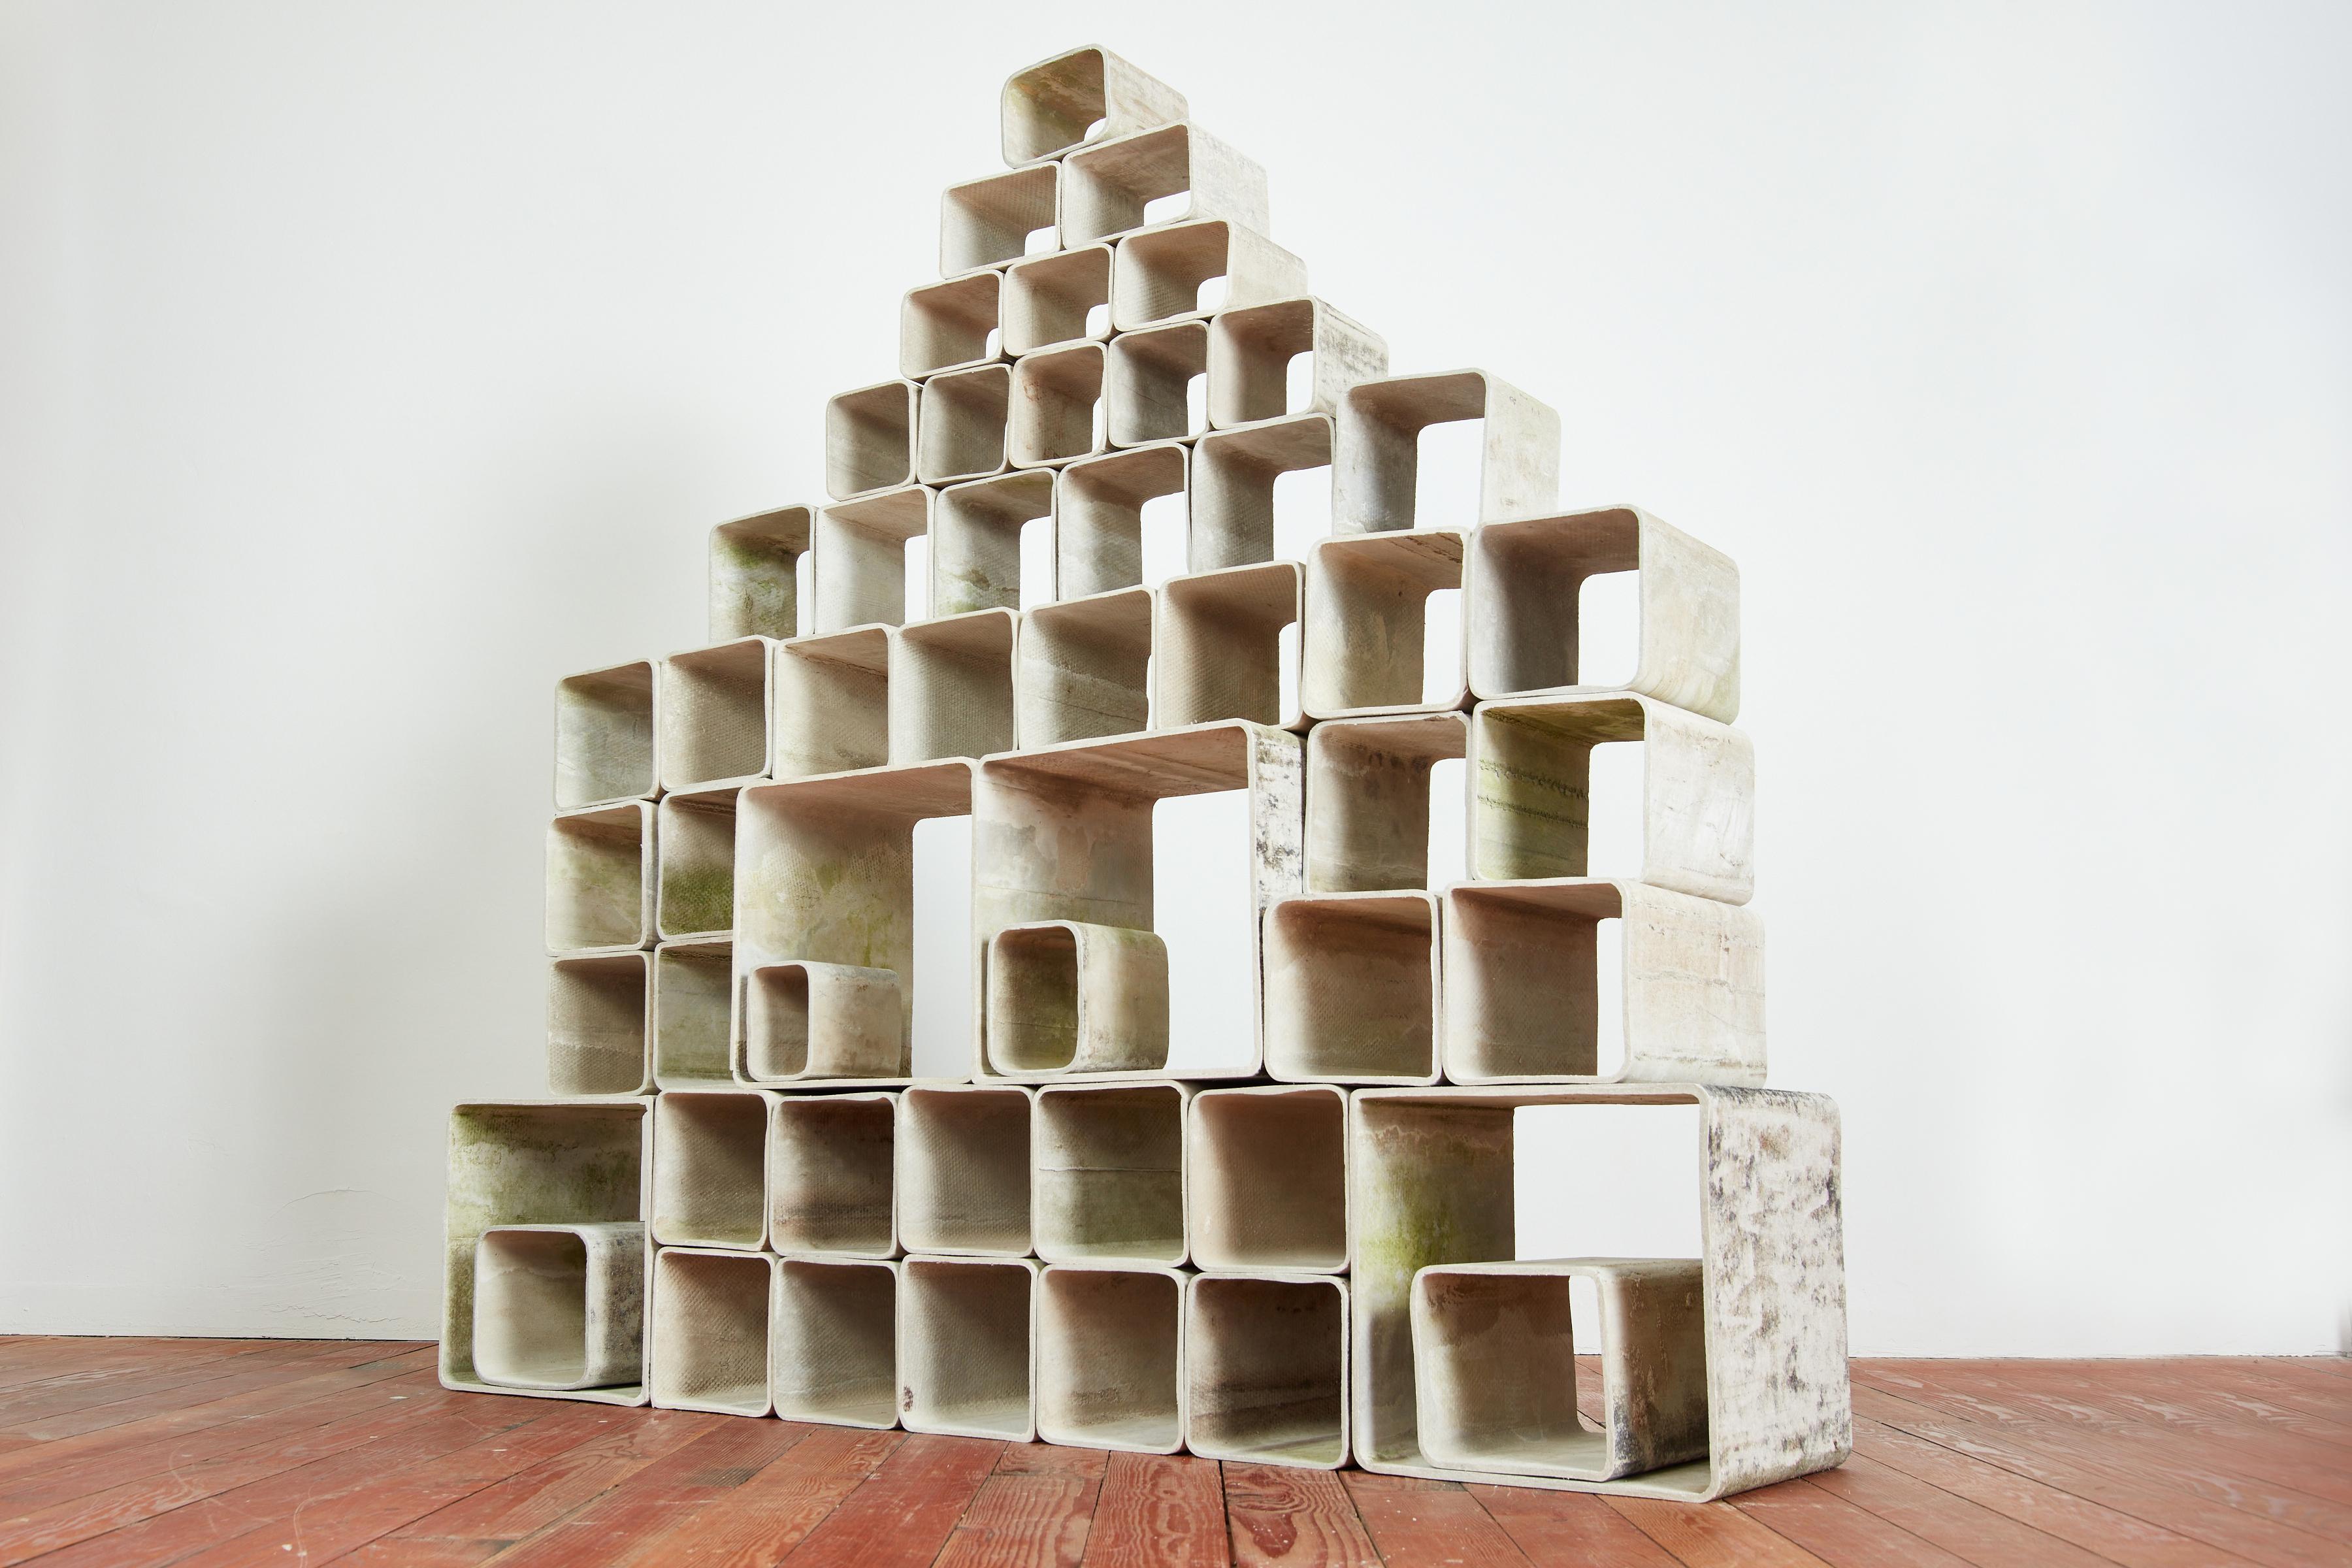 Incredible 52 piece concrete modular bookcase by Willy Guhl
Composed of different sized concrete cubes - can be arranged in various different forms according to space and use. 
Great as a room divider or bookcase. 
Wonderful patina 
Extremely